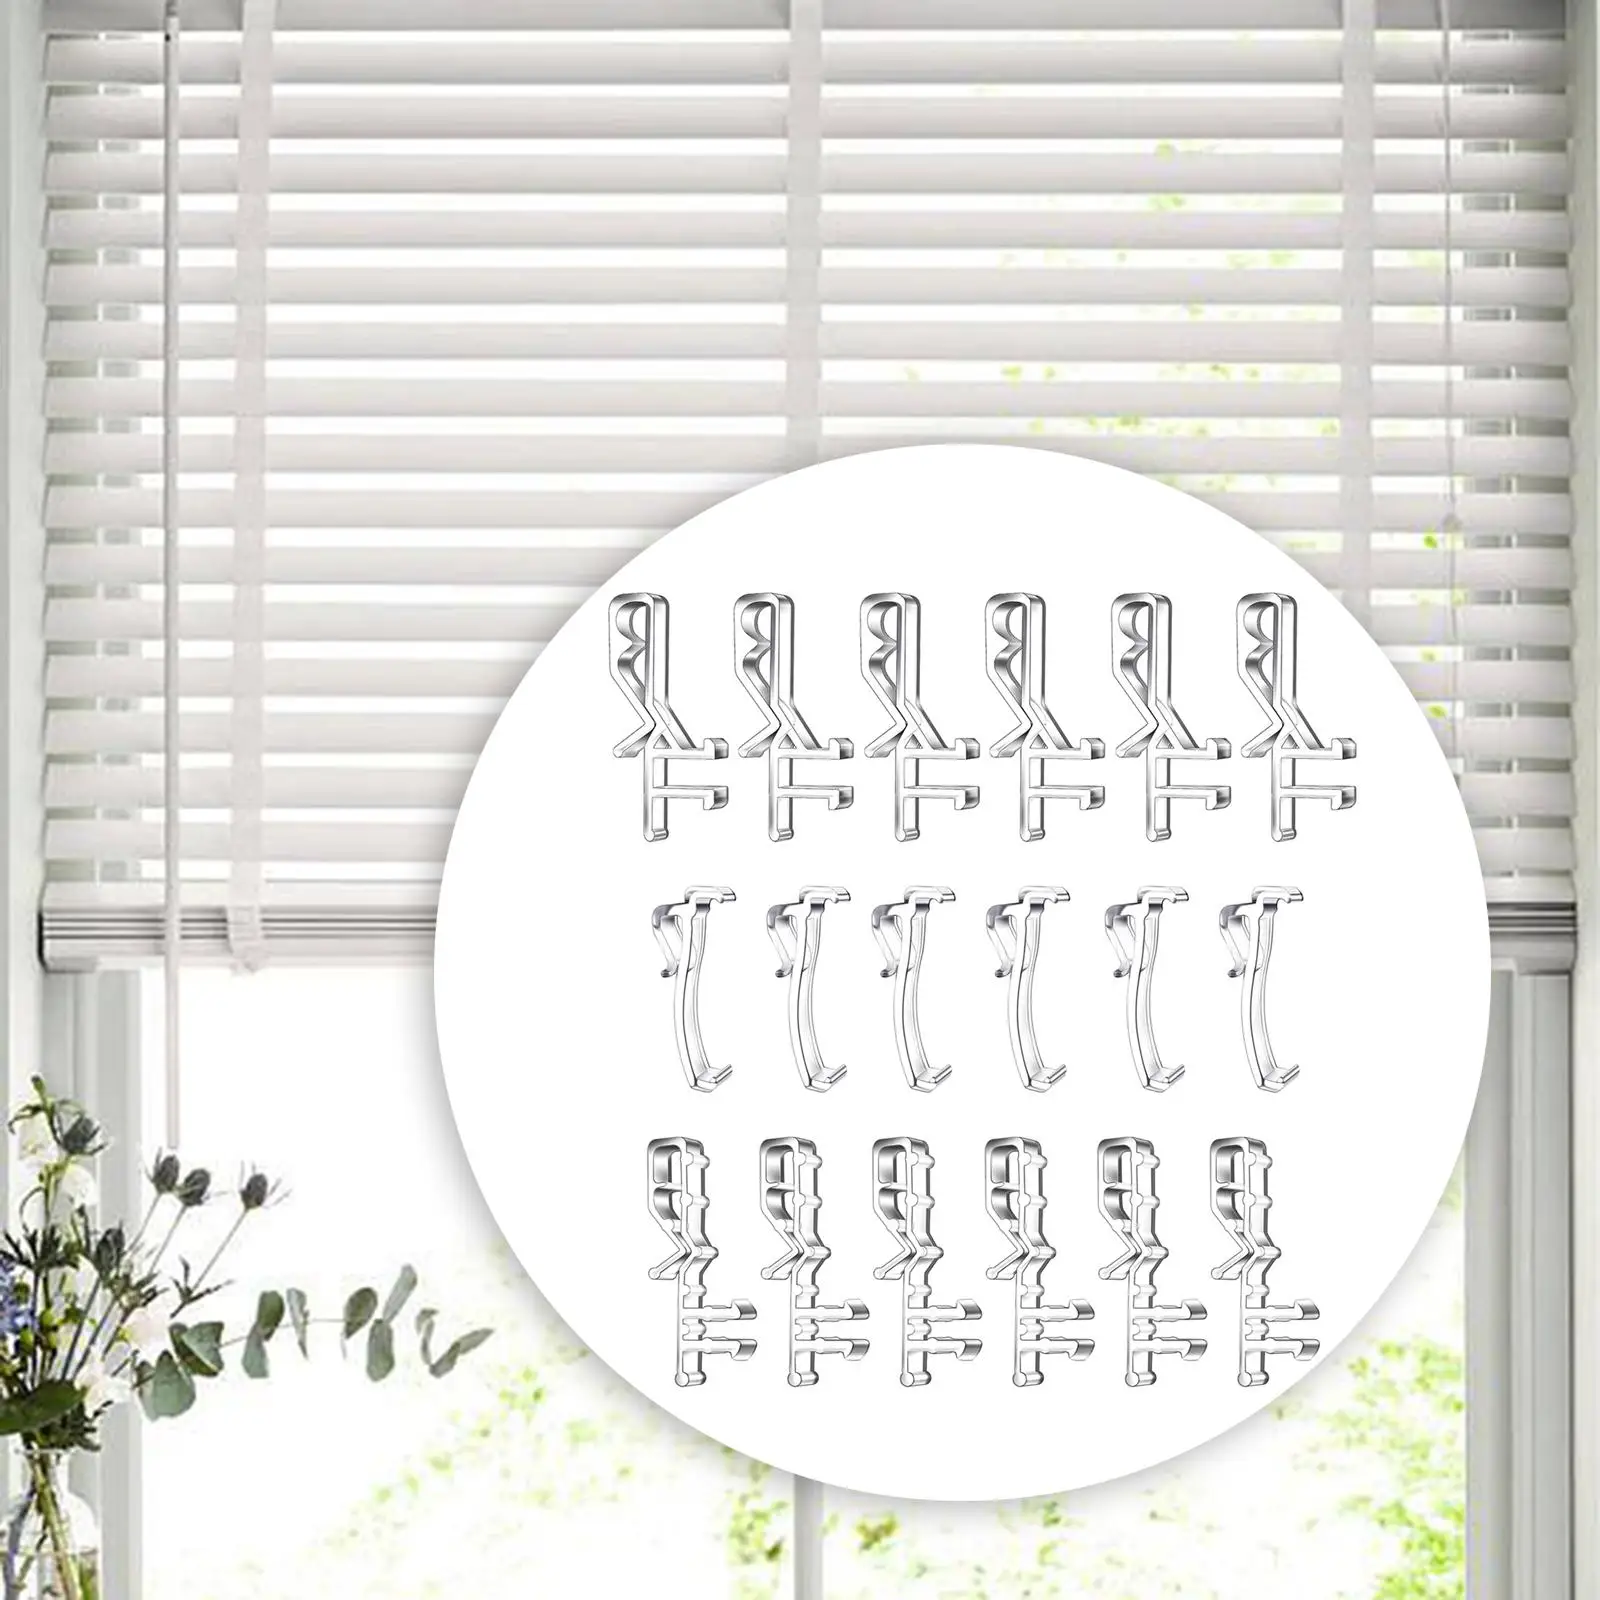 18Pcs Channel Valance Clips Window Blind Clips Blind Channel Cover Clips Valance Holder for Kitchen Office Home Bedroom Bathroom